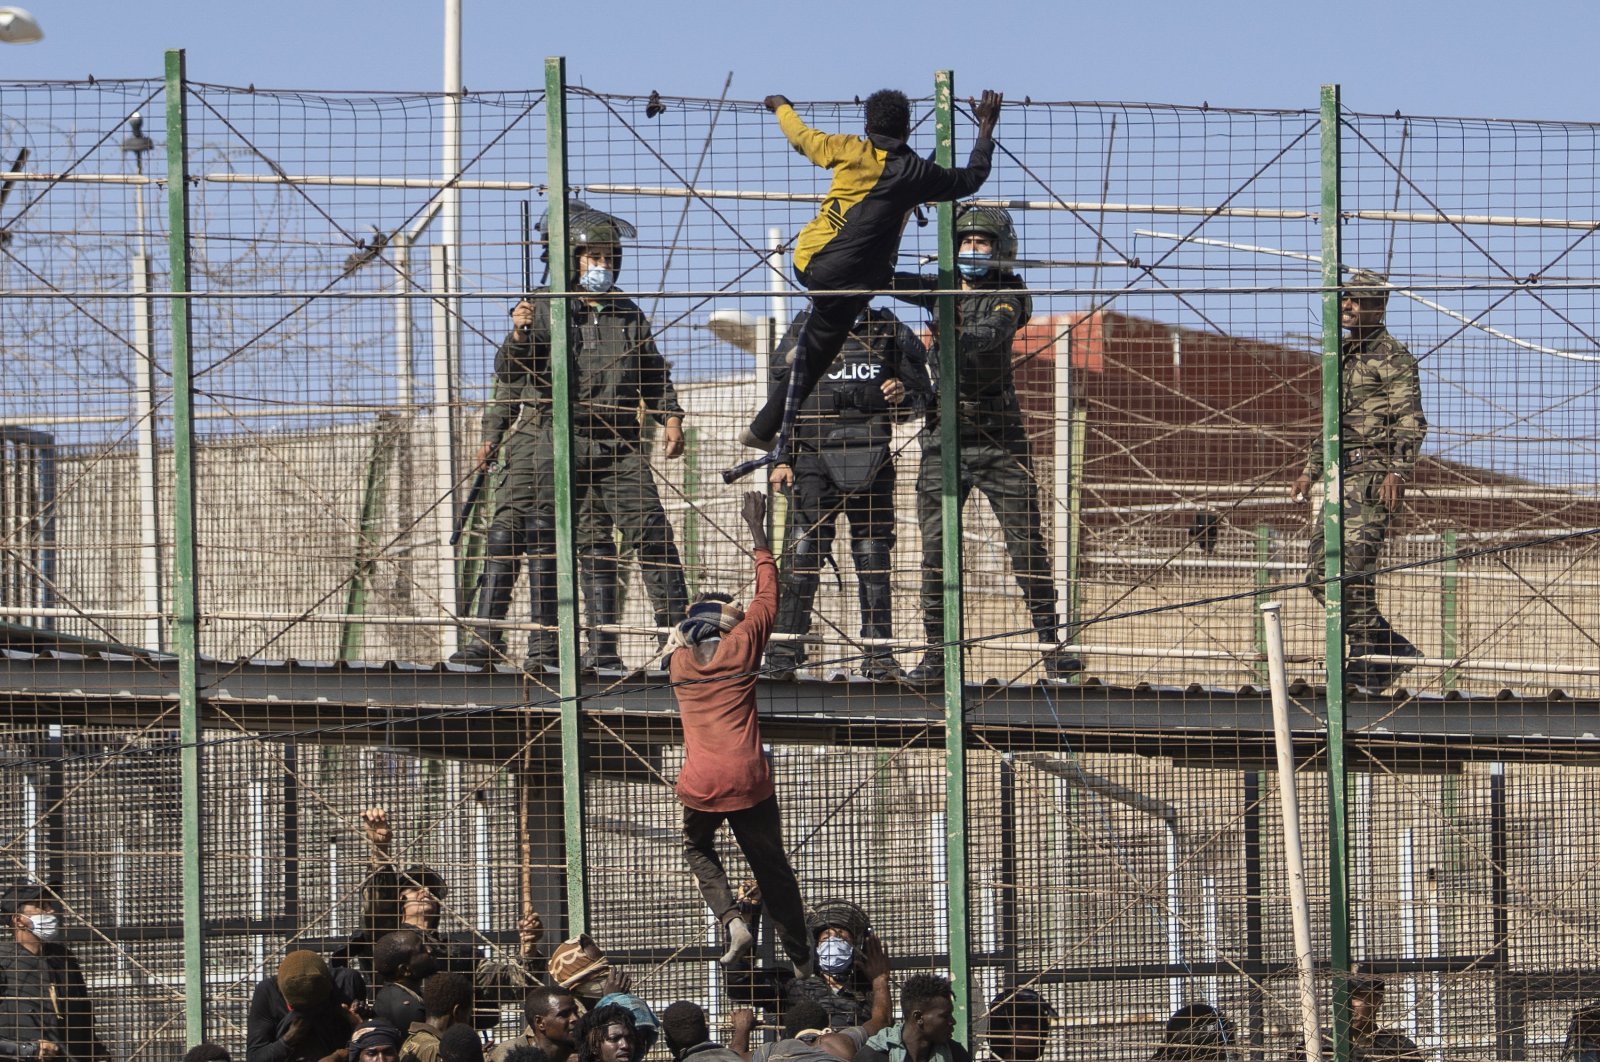 Migrants climb the fences separating the Spanish enclave of Melilla from Morocco in Melilla, Spain, June 24, 2022. (AP Photo)